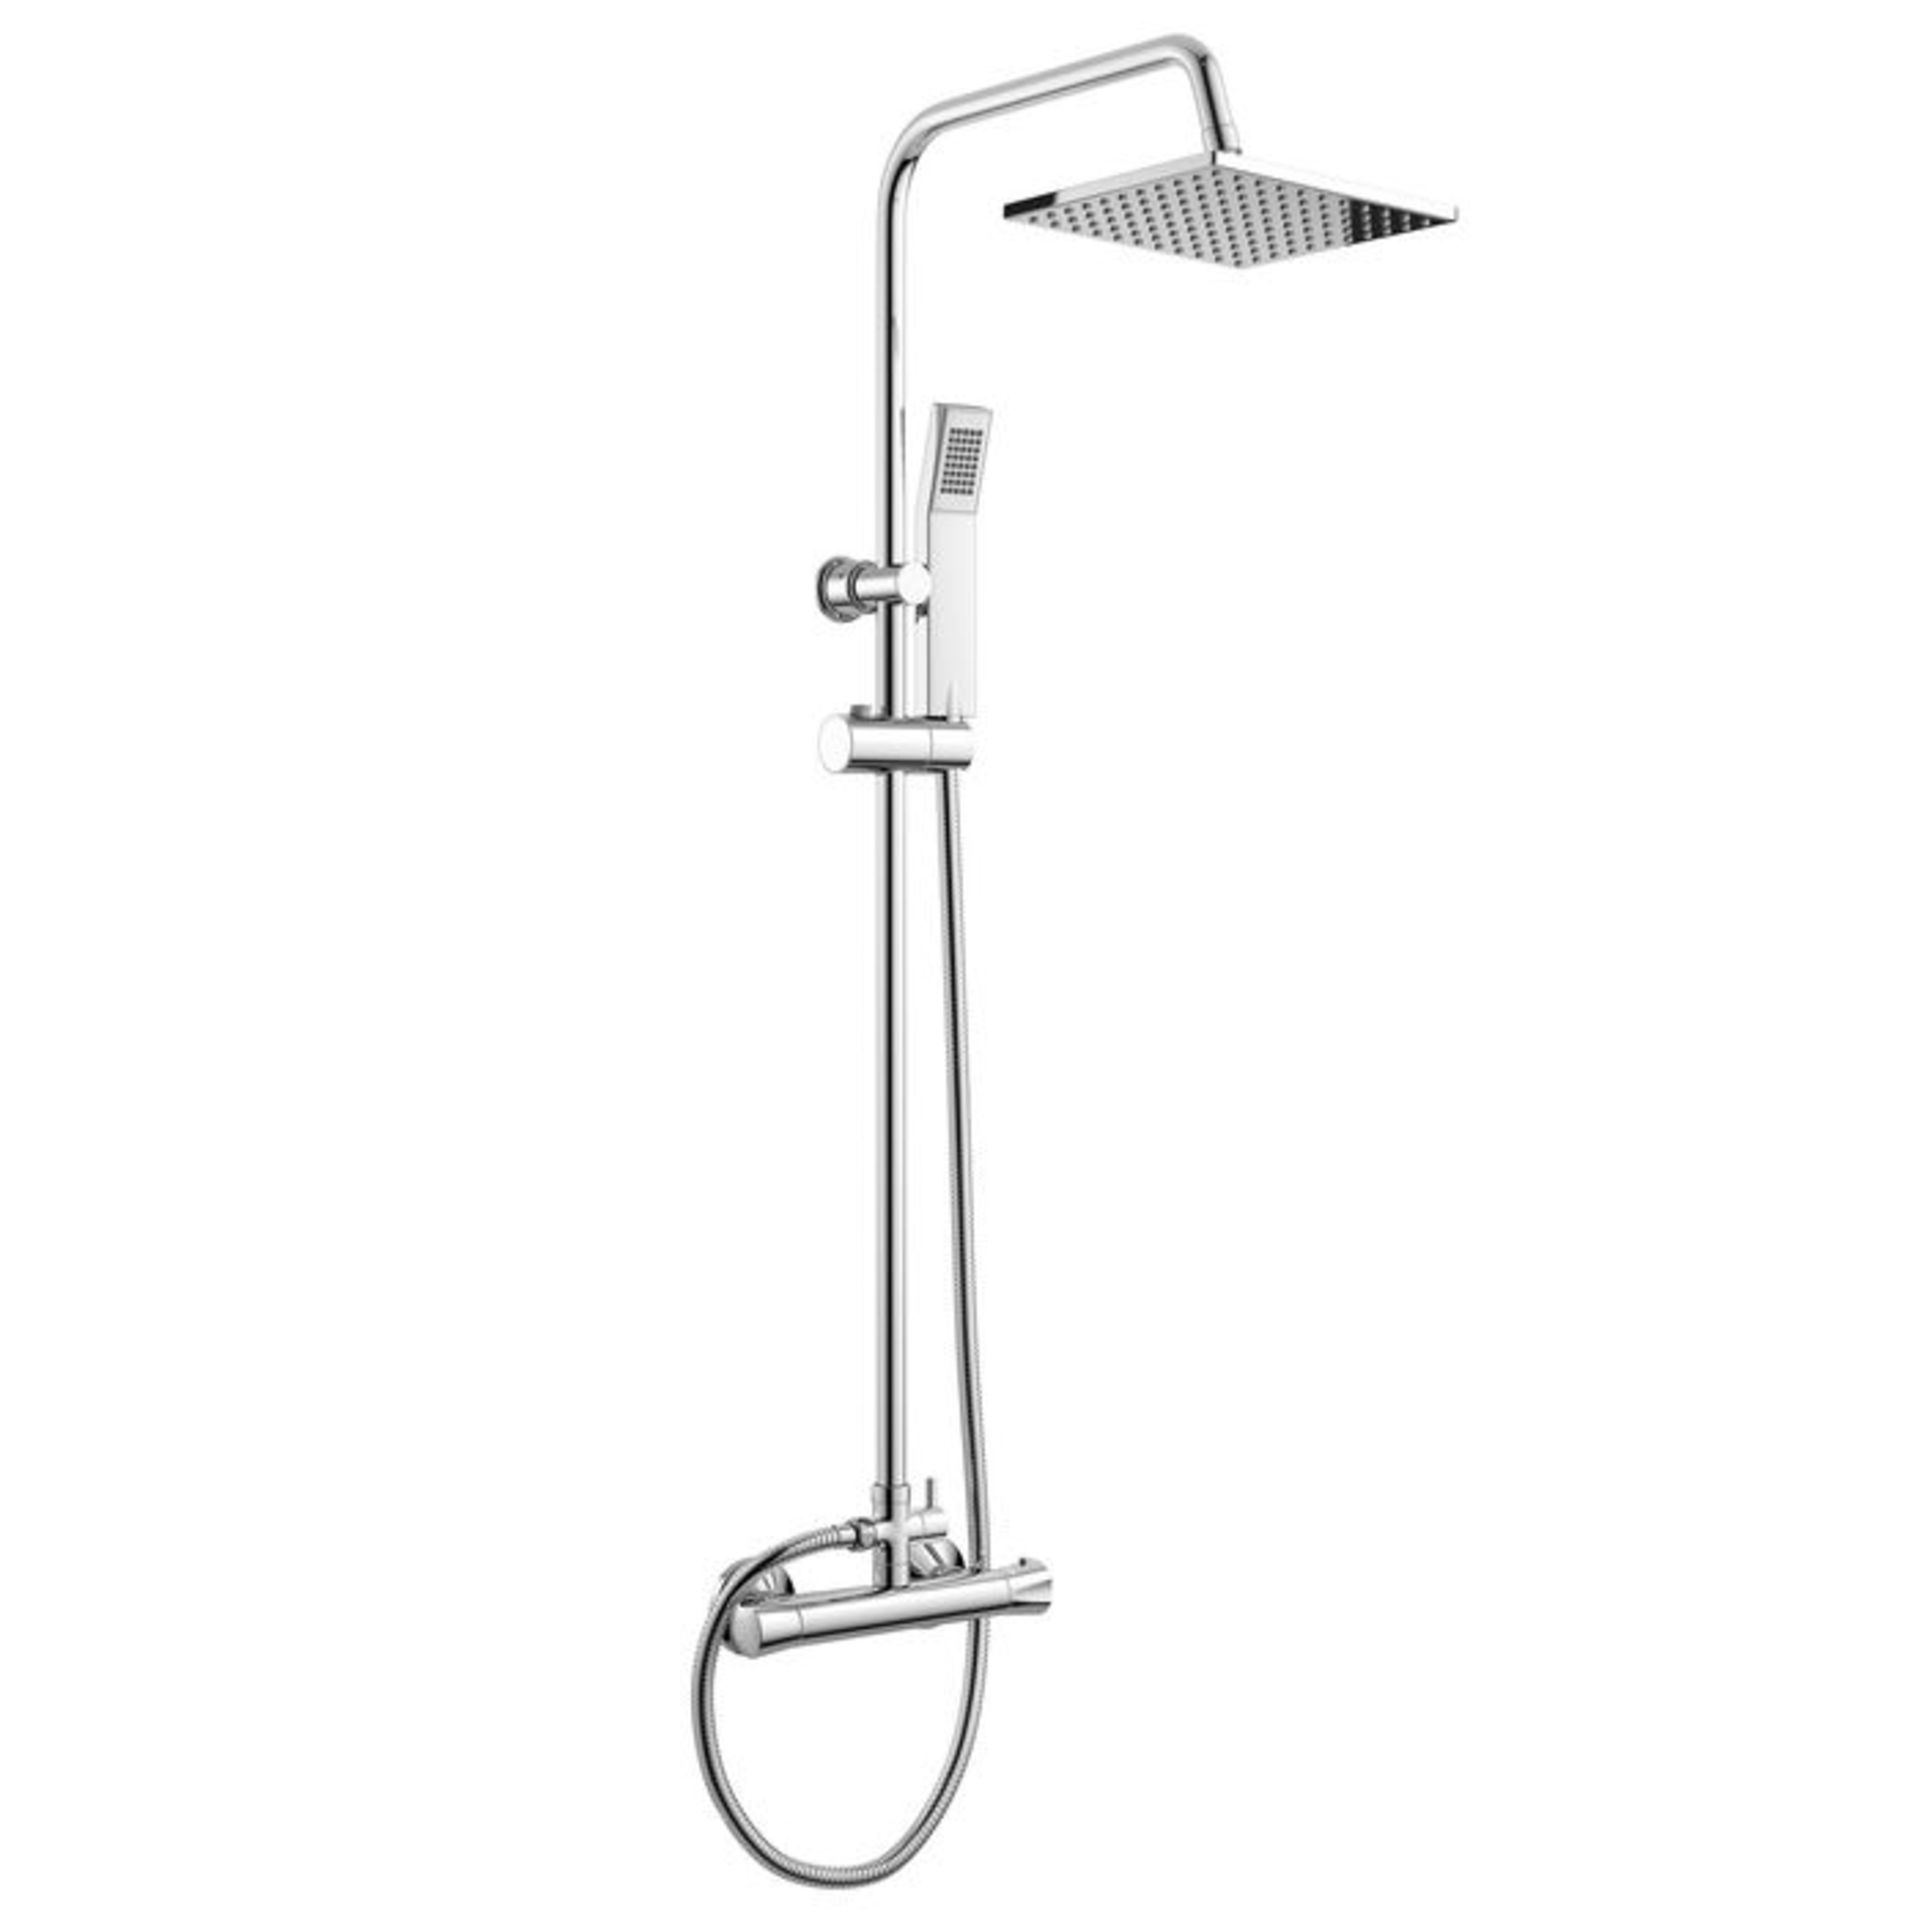 (G63) Square Exposed Thermostatic Shower Kit & Medium Head. They say three is a magic number,